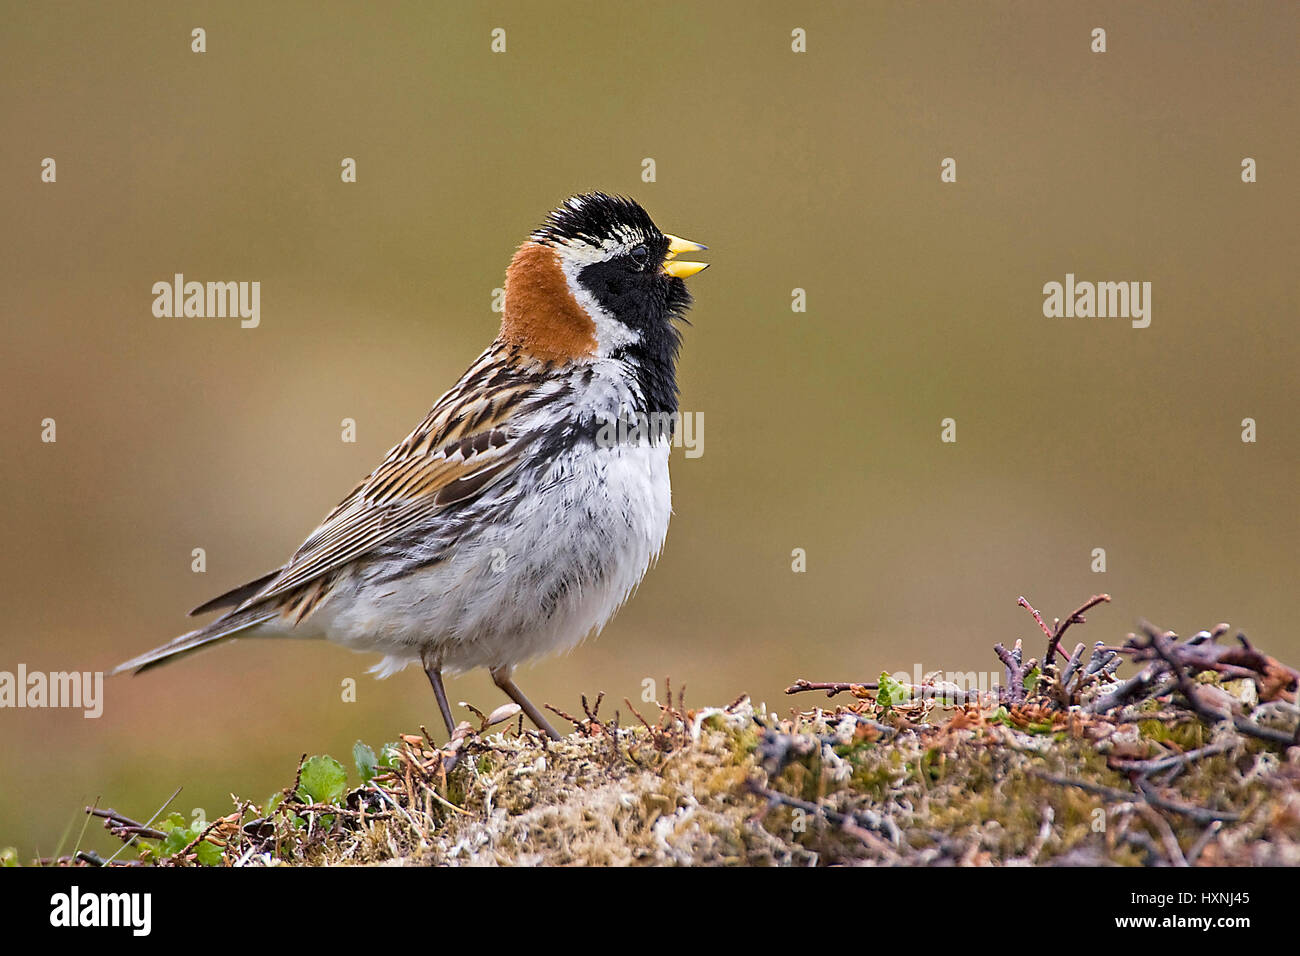 Spur bunting little man, Lapland Bunting paints, Spornammer Maennchen | Lapland Bunting male Stock Photo